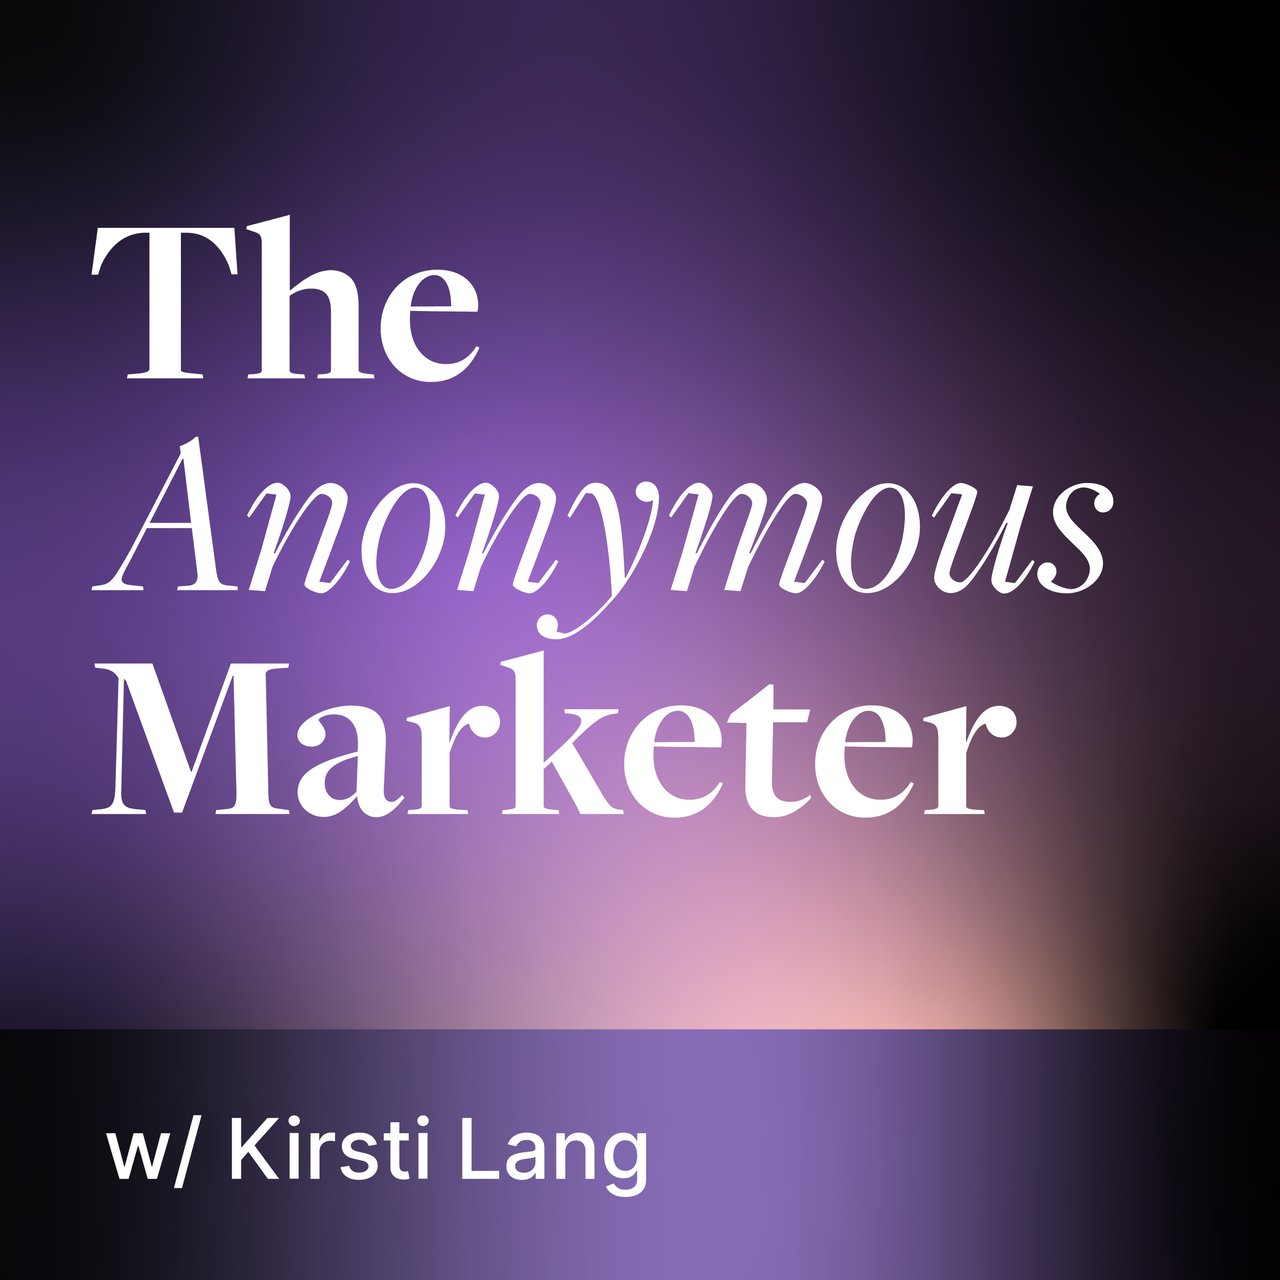 The album cover for the show The Anonymous Marketer